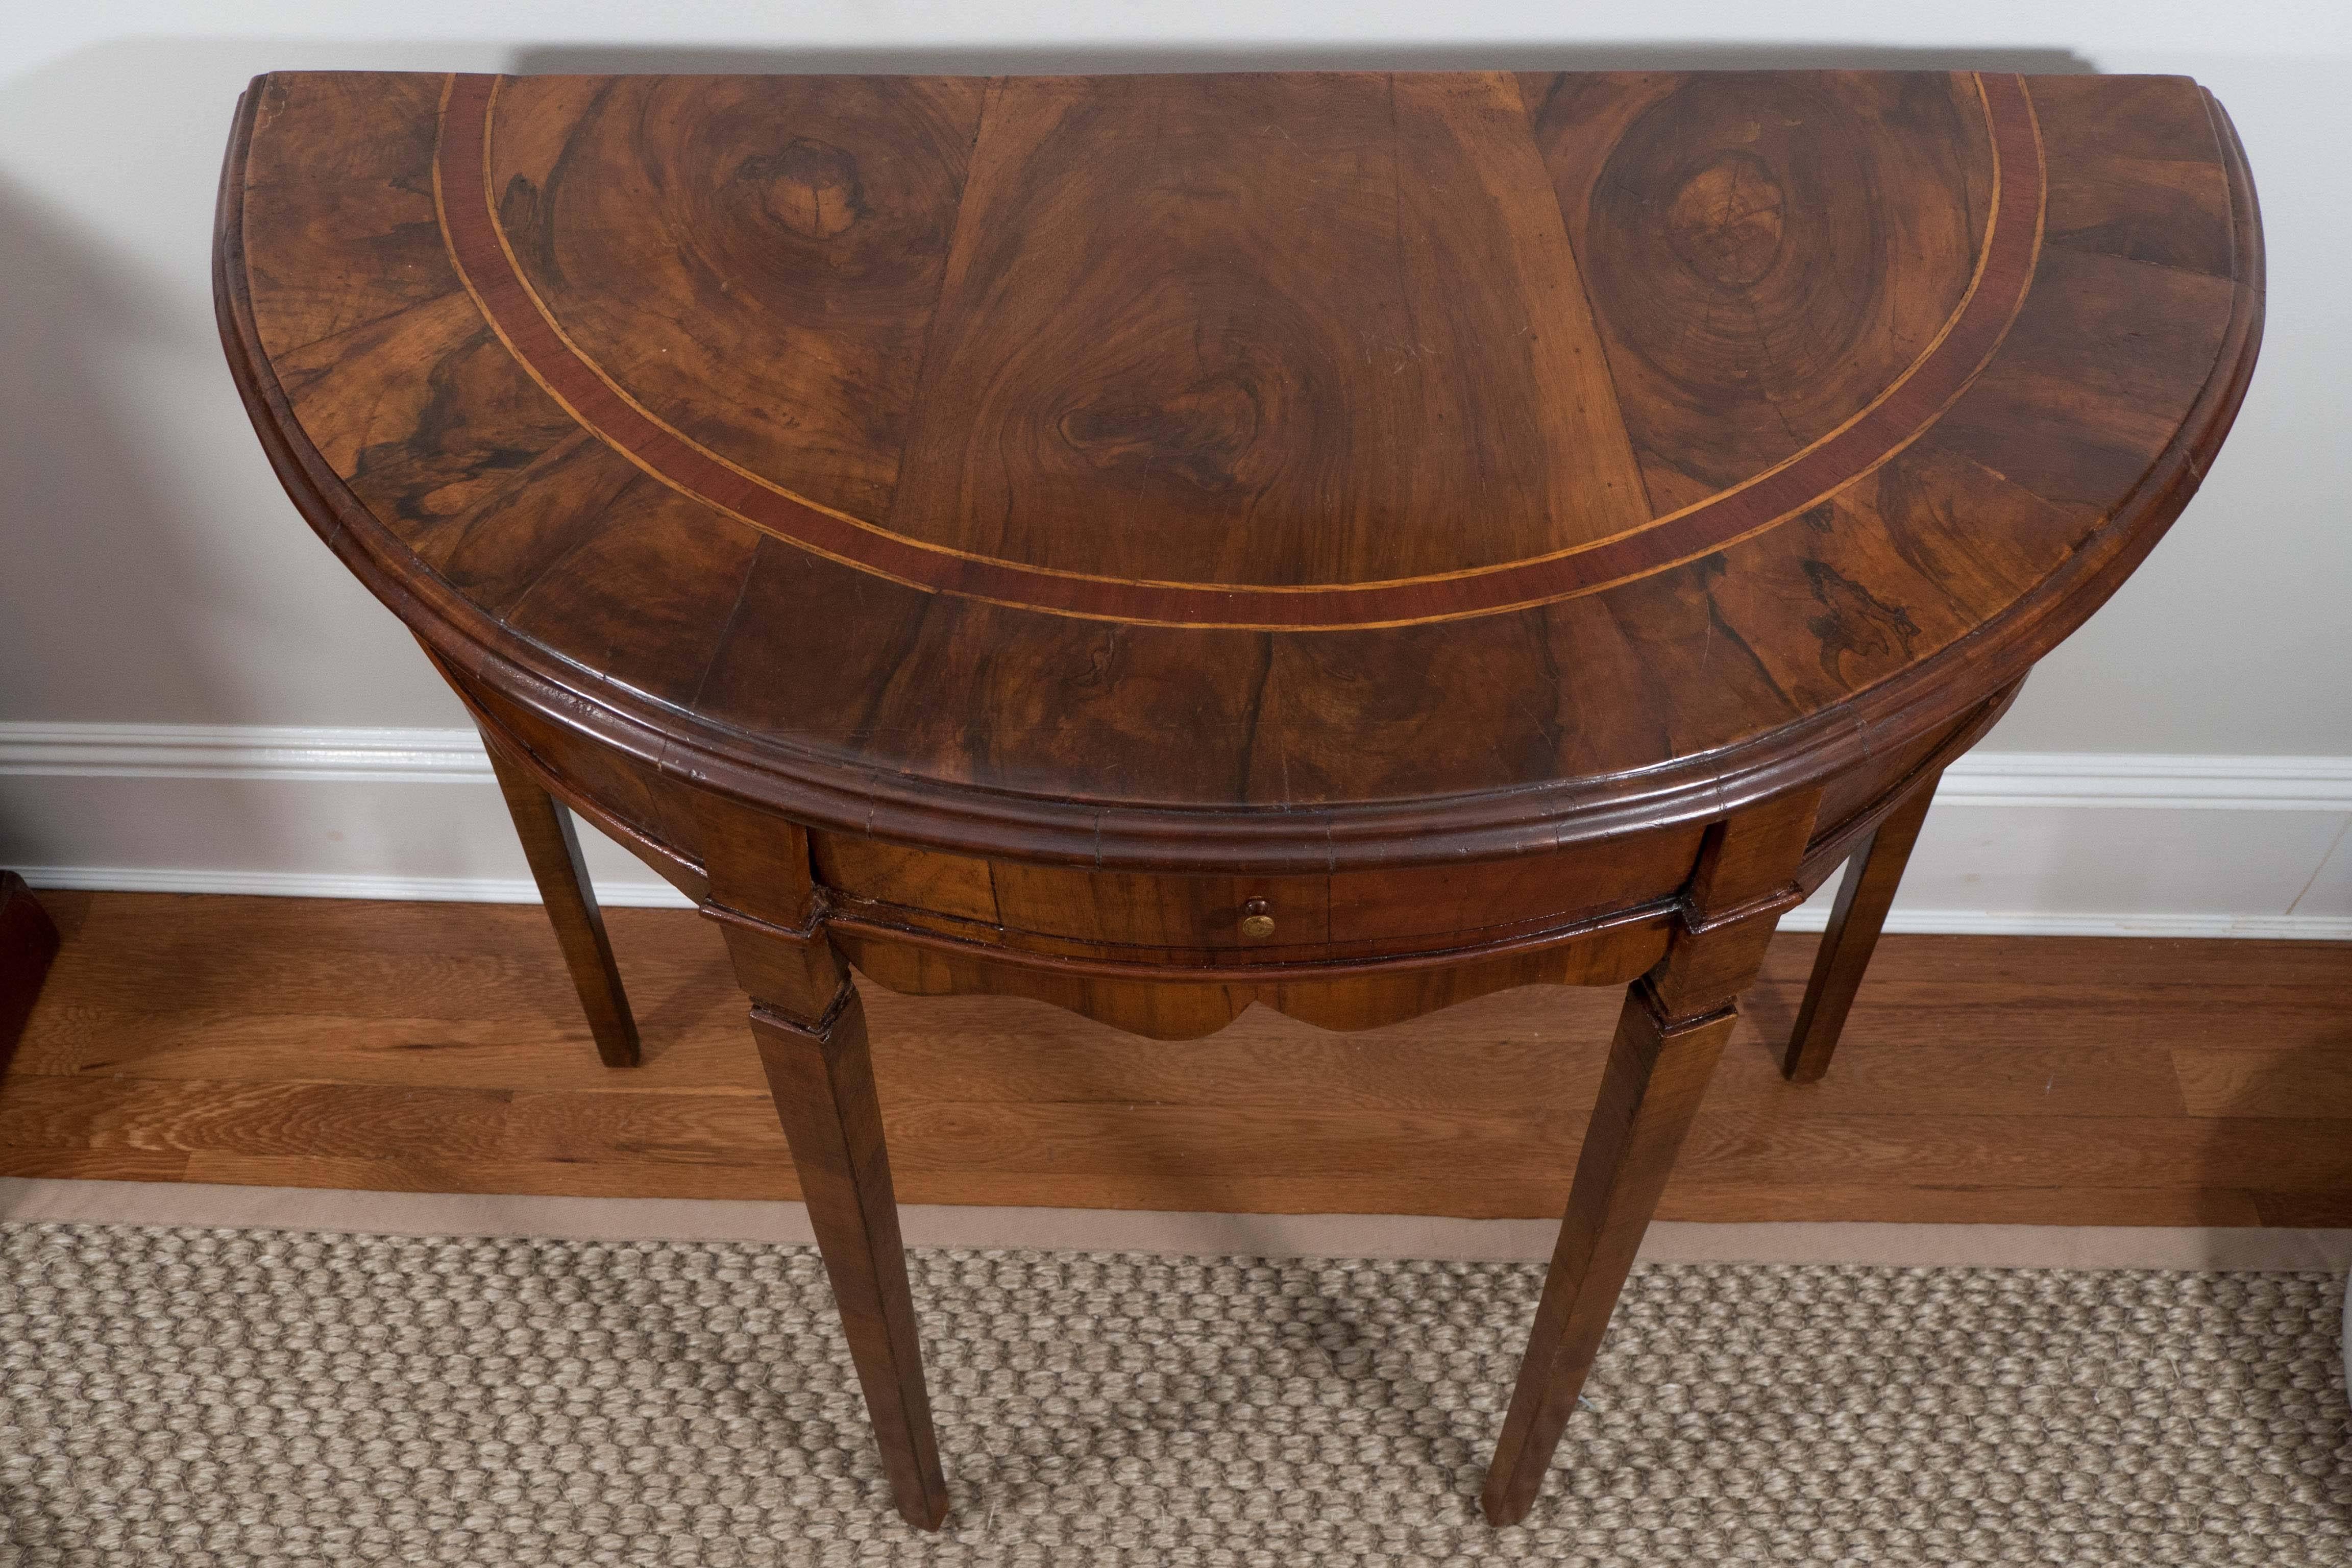 What makes this little table special are its fine details. The warm burled walnut finish, inlaid semi-circle design on top, the scalloped apron, and slightly tapered legs make this Italian table a little jewel that can be used as a side table, end